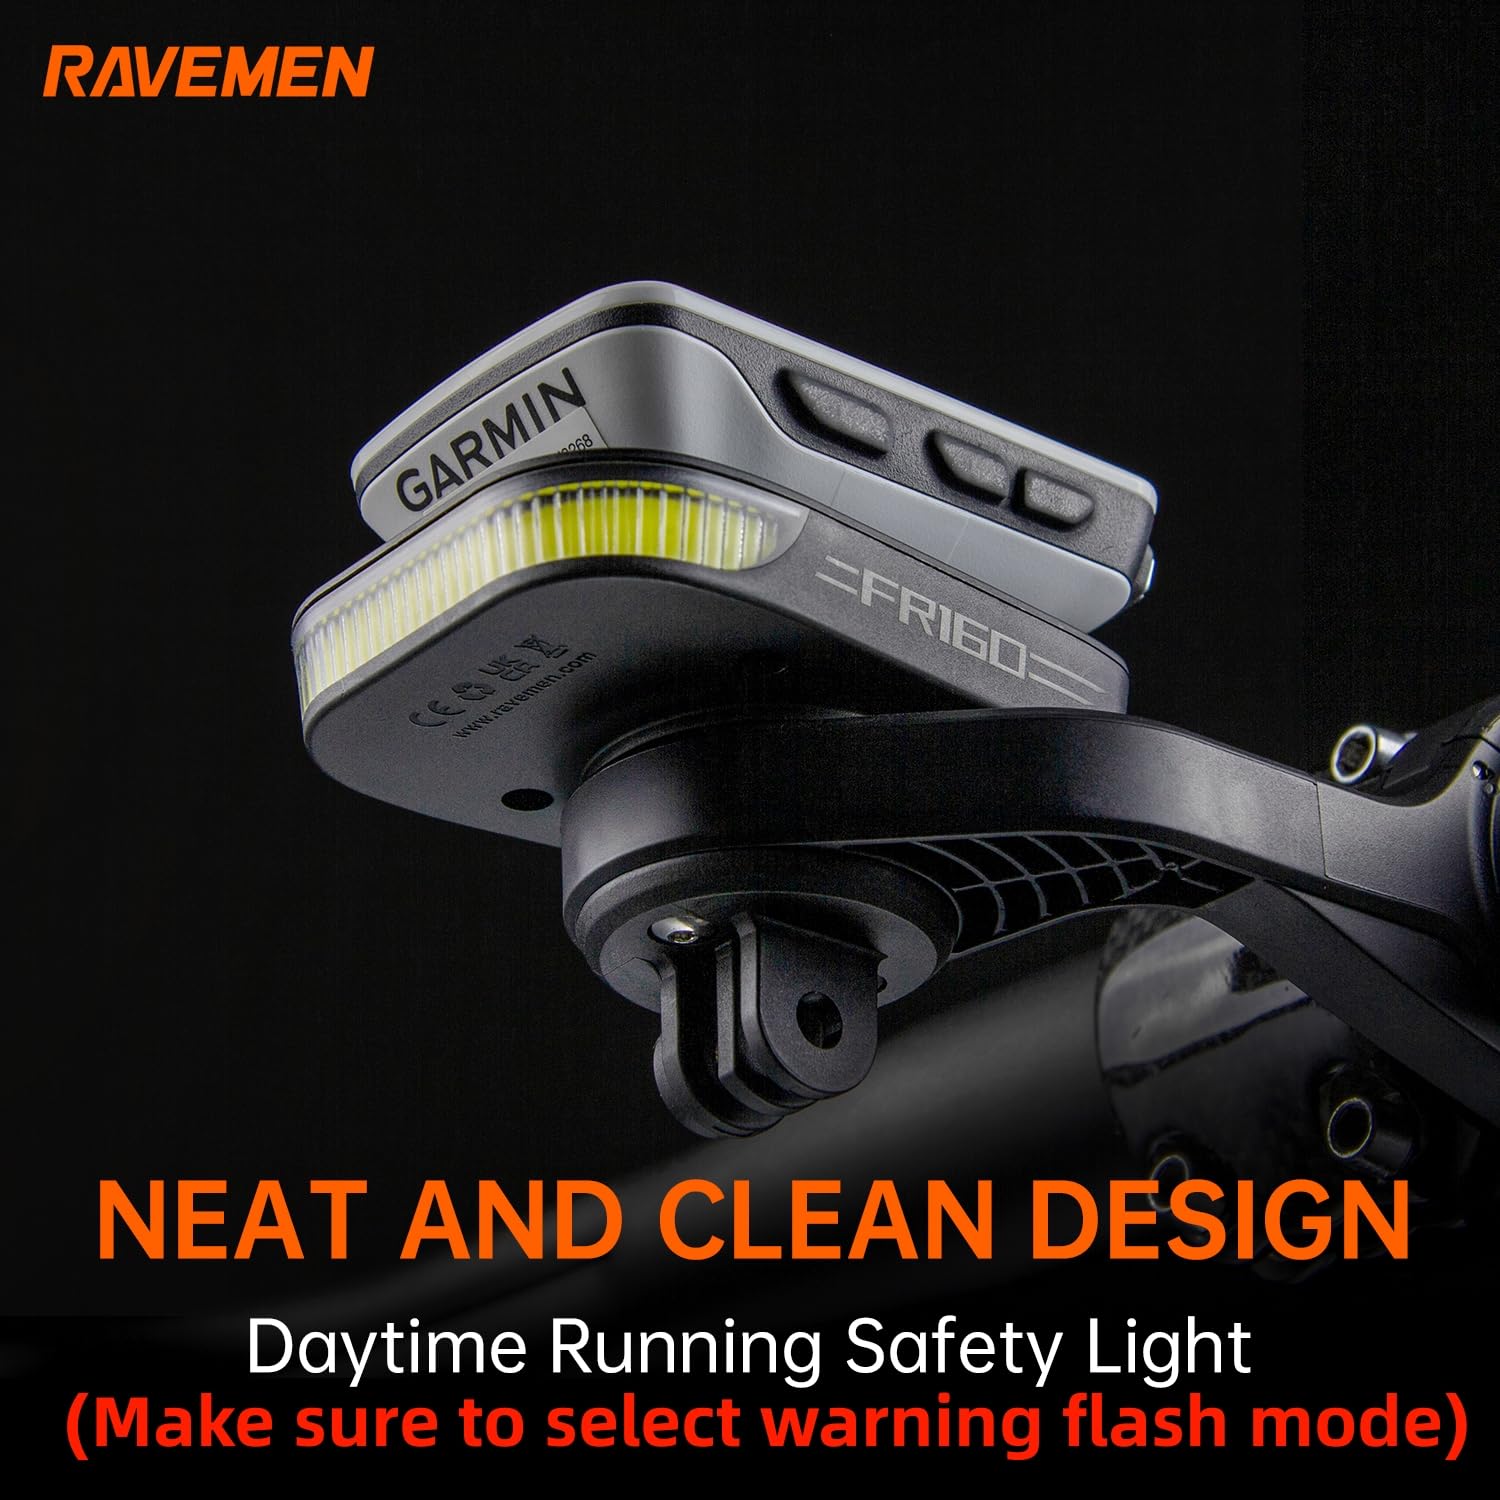 RAVEMEN FR160 Compatible with Garmin/iGPSPORT/COOSPO Cycling GPS/Bike Computer, IPX6 Waterproof Auxiliary Light with Side Visibility Warning Flash Light for Riding Safety (Patent Protected)